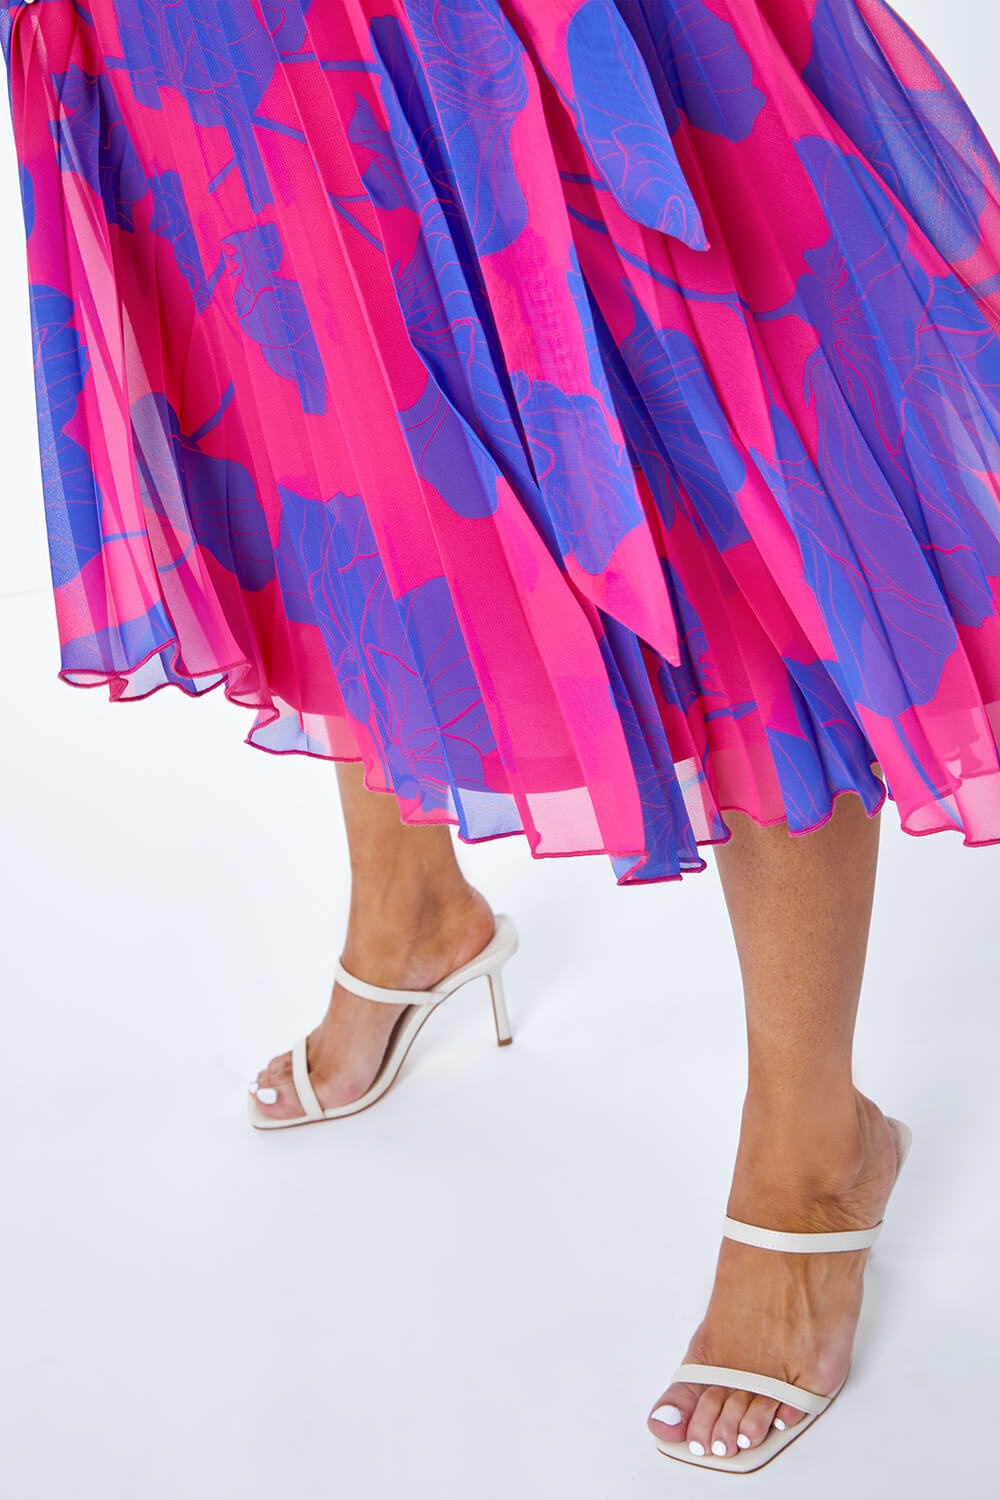 PINK Petite Floral Linear Pleated Chiffon Dress, Image 5 of 5